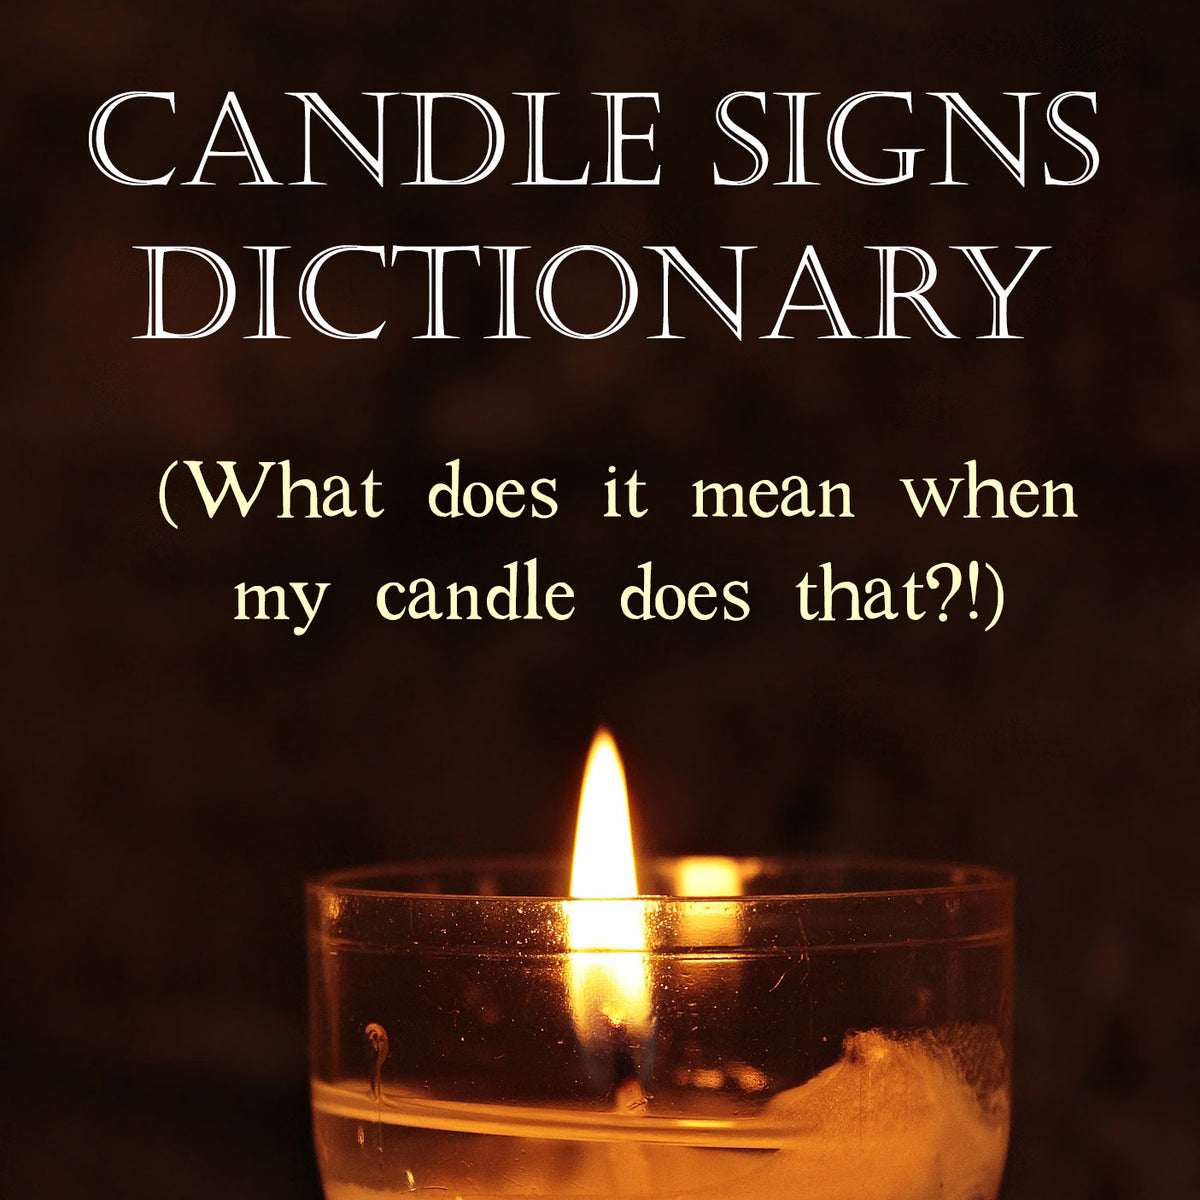 jumping-candle-flame-meaning